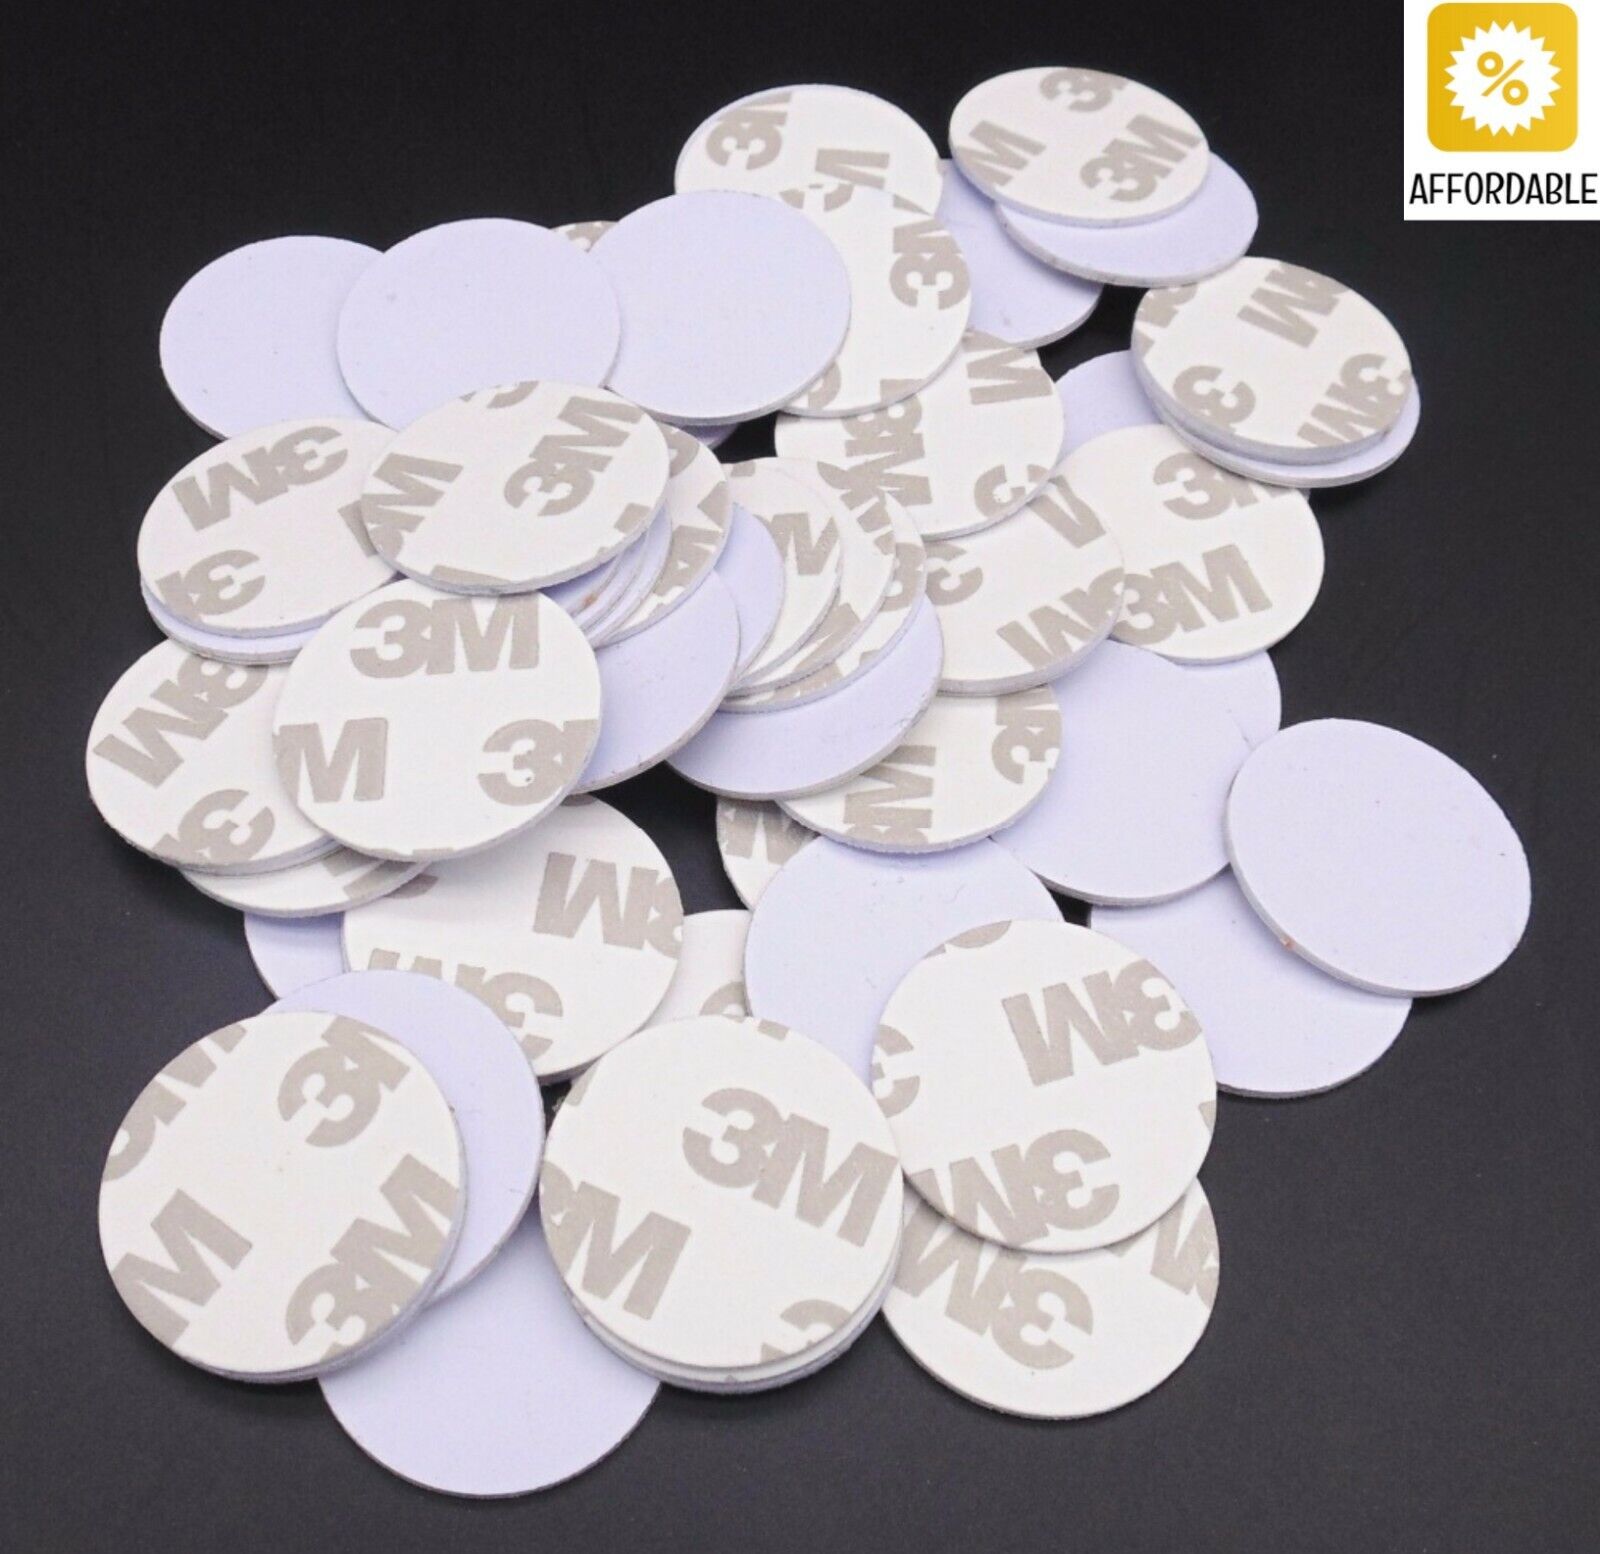 Stickers Coins 25mm Smart Tags Read-Only Access Control Cards TK4100(EM4100) Stickers Coins China stickerscoins001